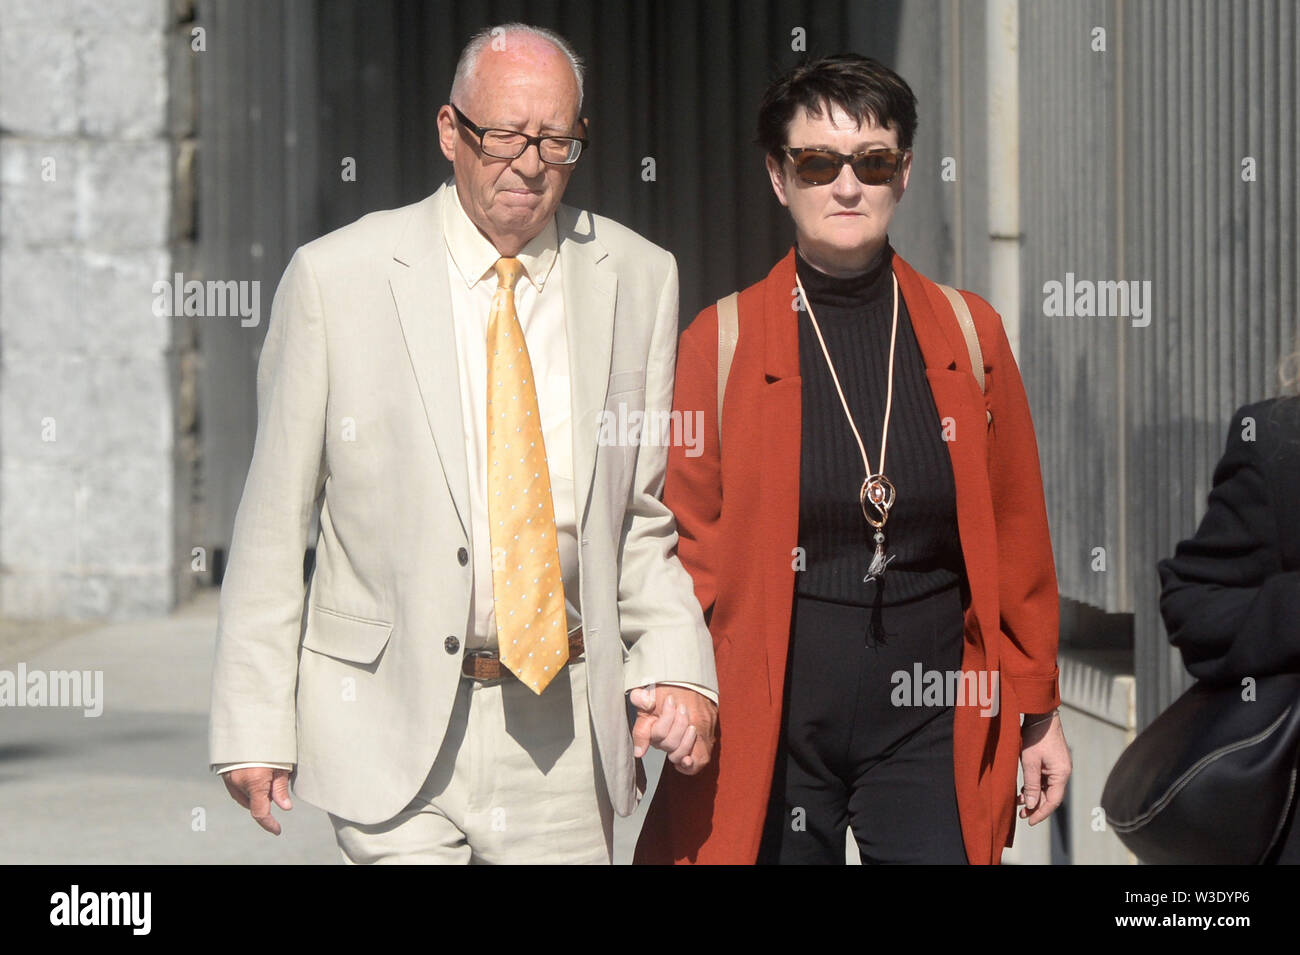 Patric and Geraldine Kriegel, the parents of murdered Ana Kriegel, arrive at the Criminal Courts of Justice in Dublin. Two juvenile killers are due to be sentenced today after they were convicted of the murder of 14-year-old Kriegel on June 18. Stock Photo